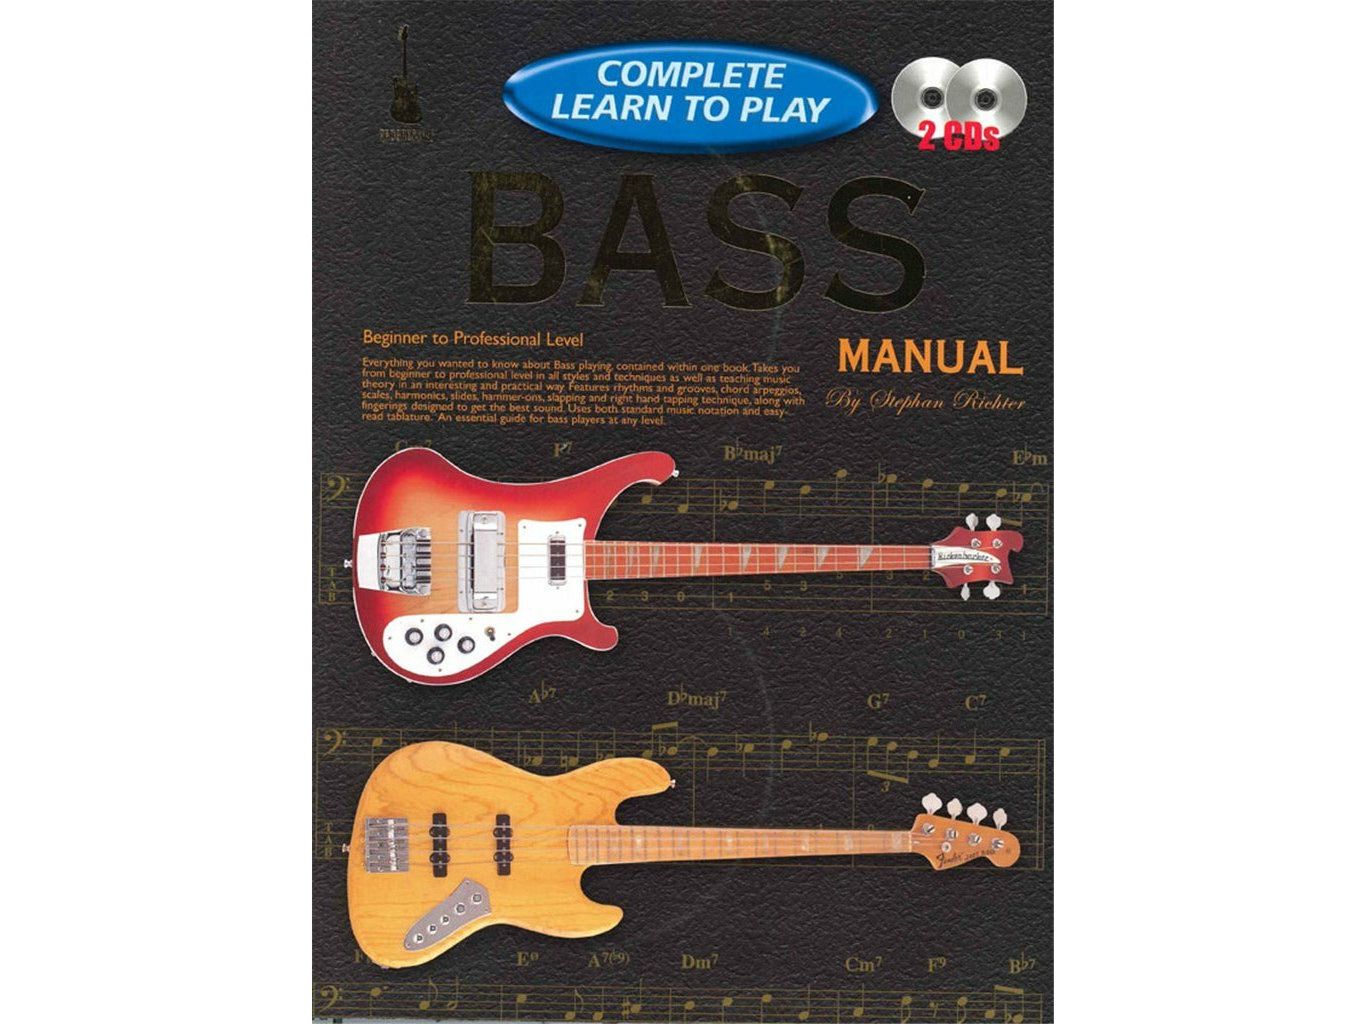 Complete Learn To Play Bass Guitar Manual +online